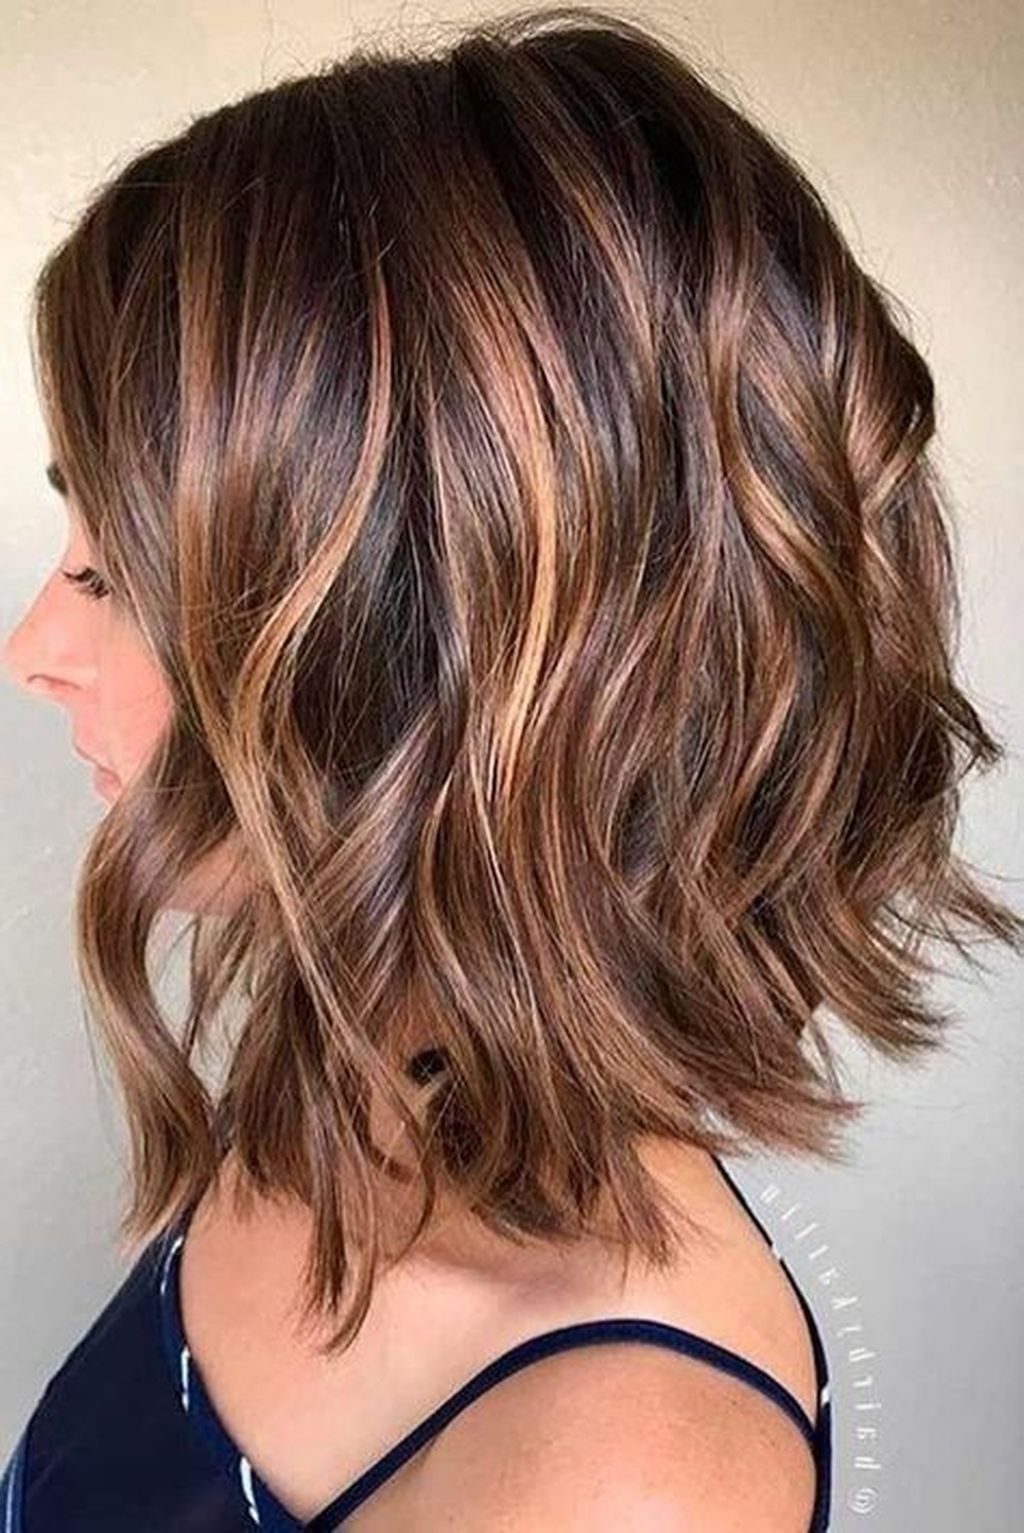 40 Relaxing Fall Hair Color Ideas For 2019 Trends -   12 hair Short color ideas